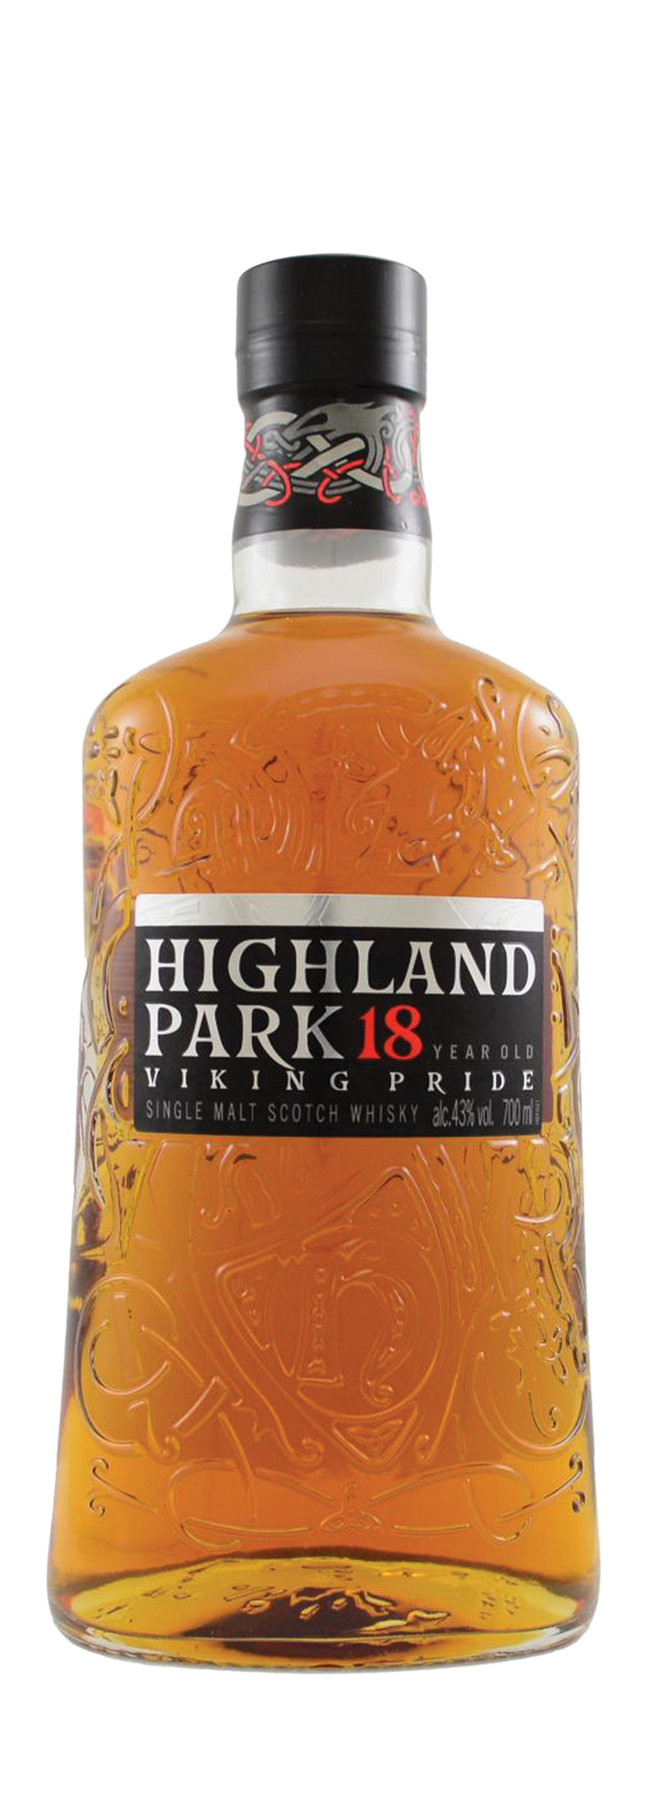 Highland Park 18 Years Old Viking Pride 43% 70cl